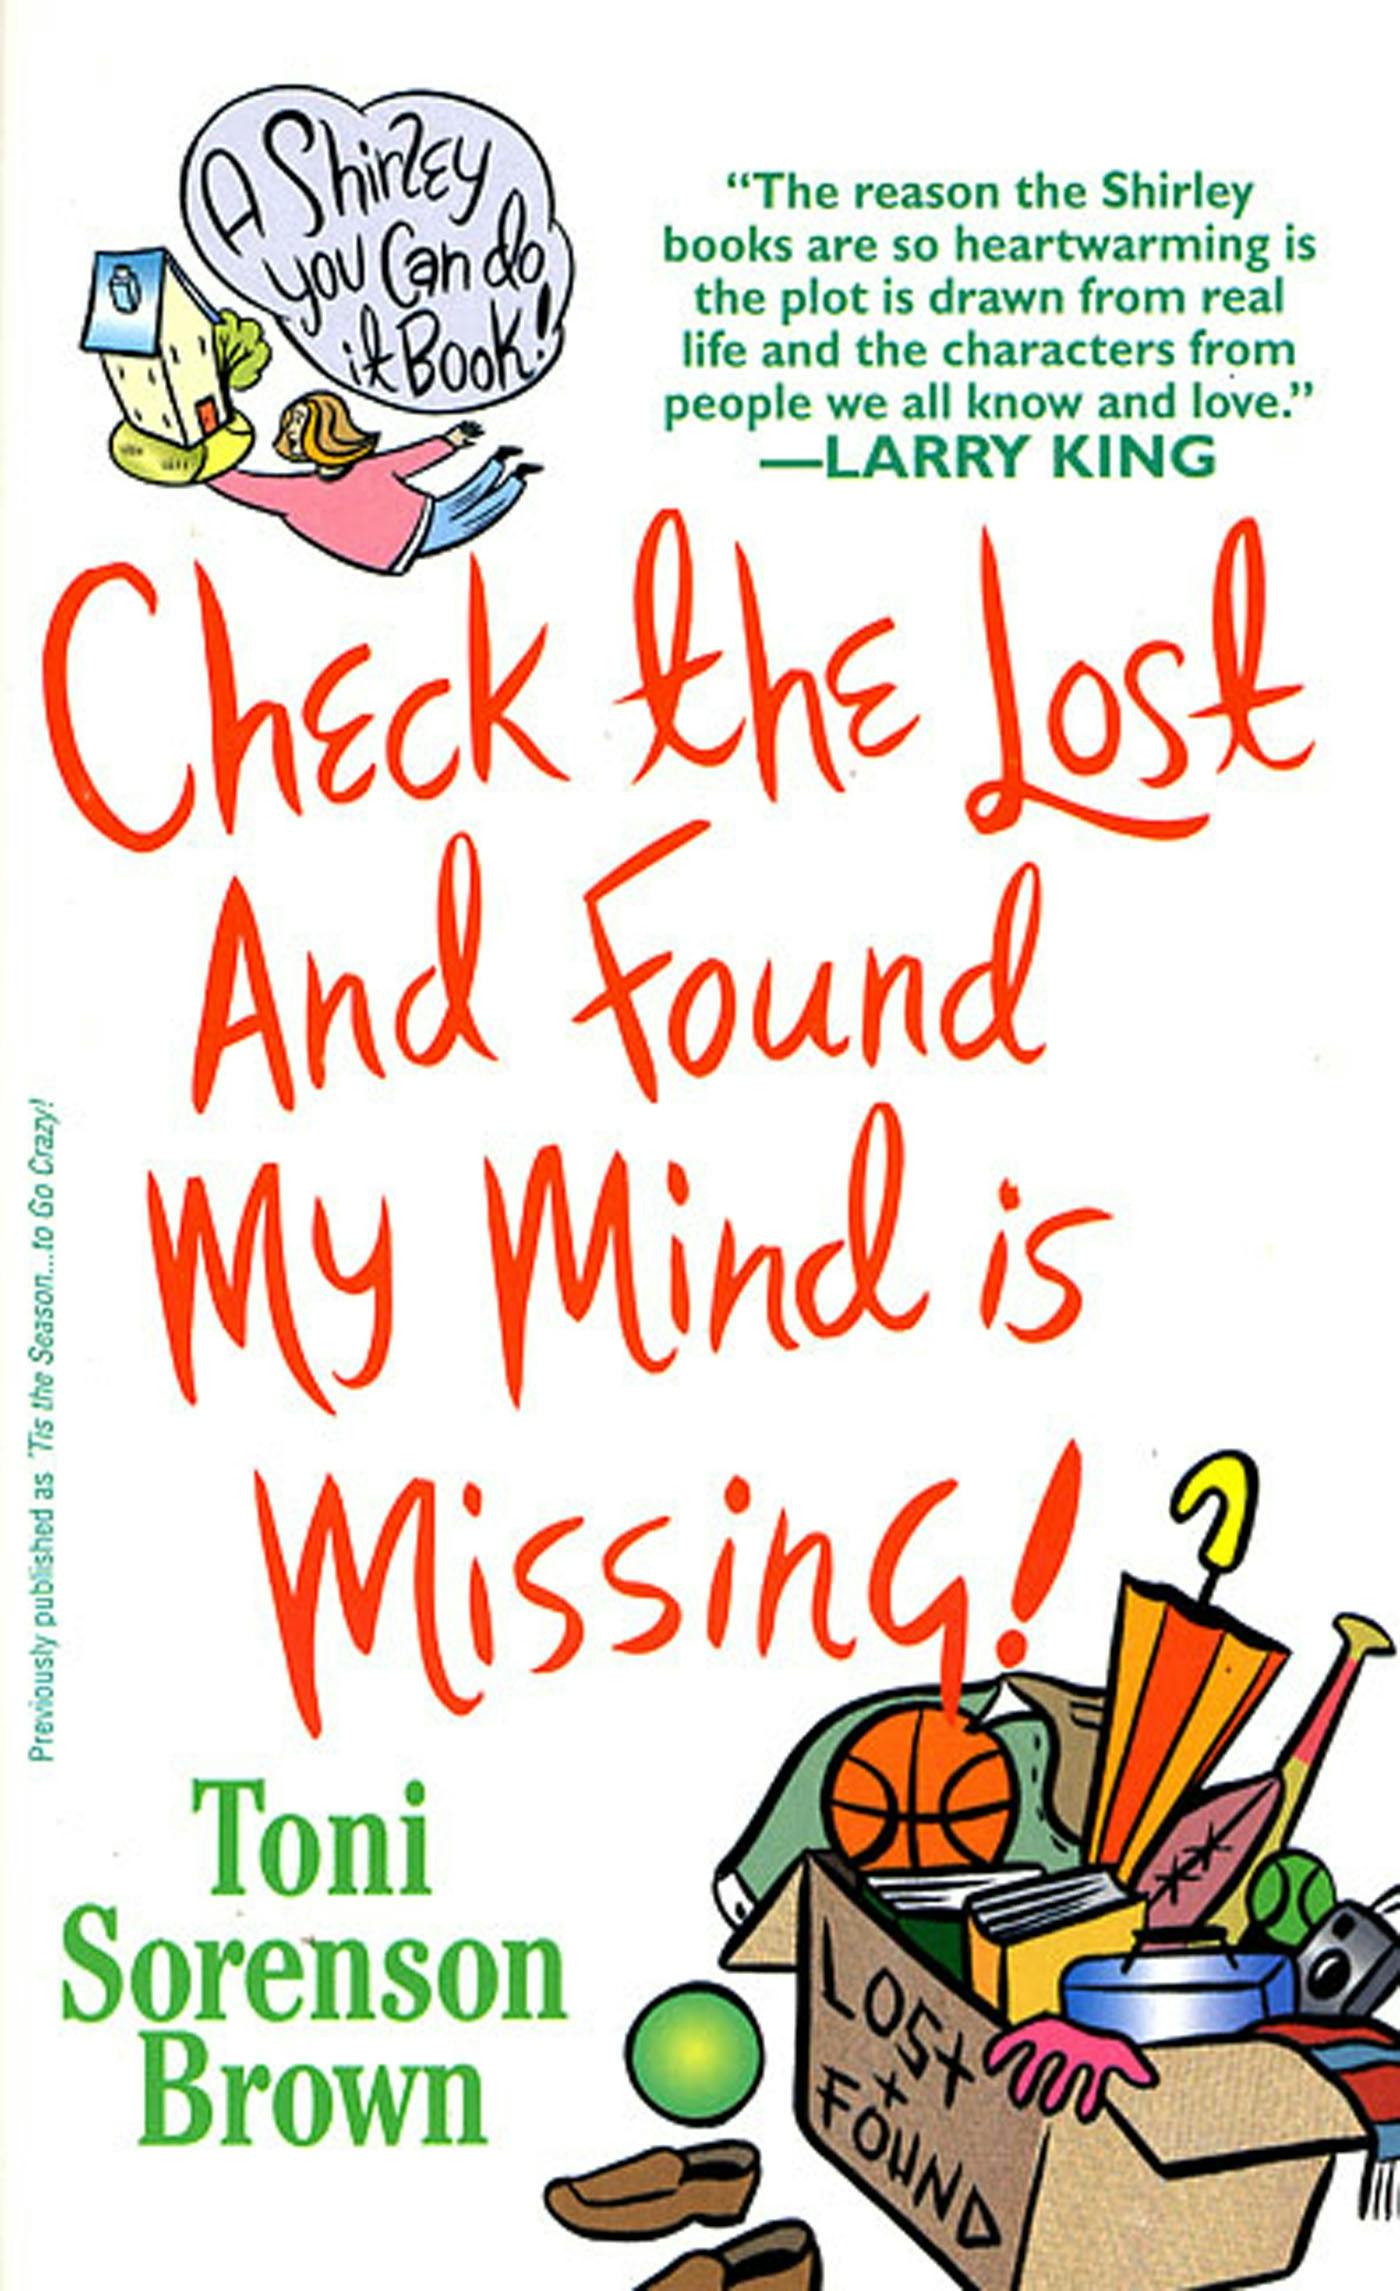 Check the Lost and Found, My Mind is Missing